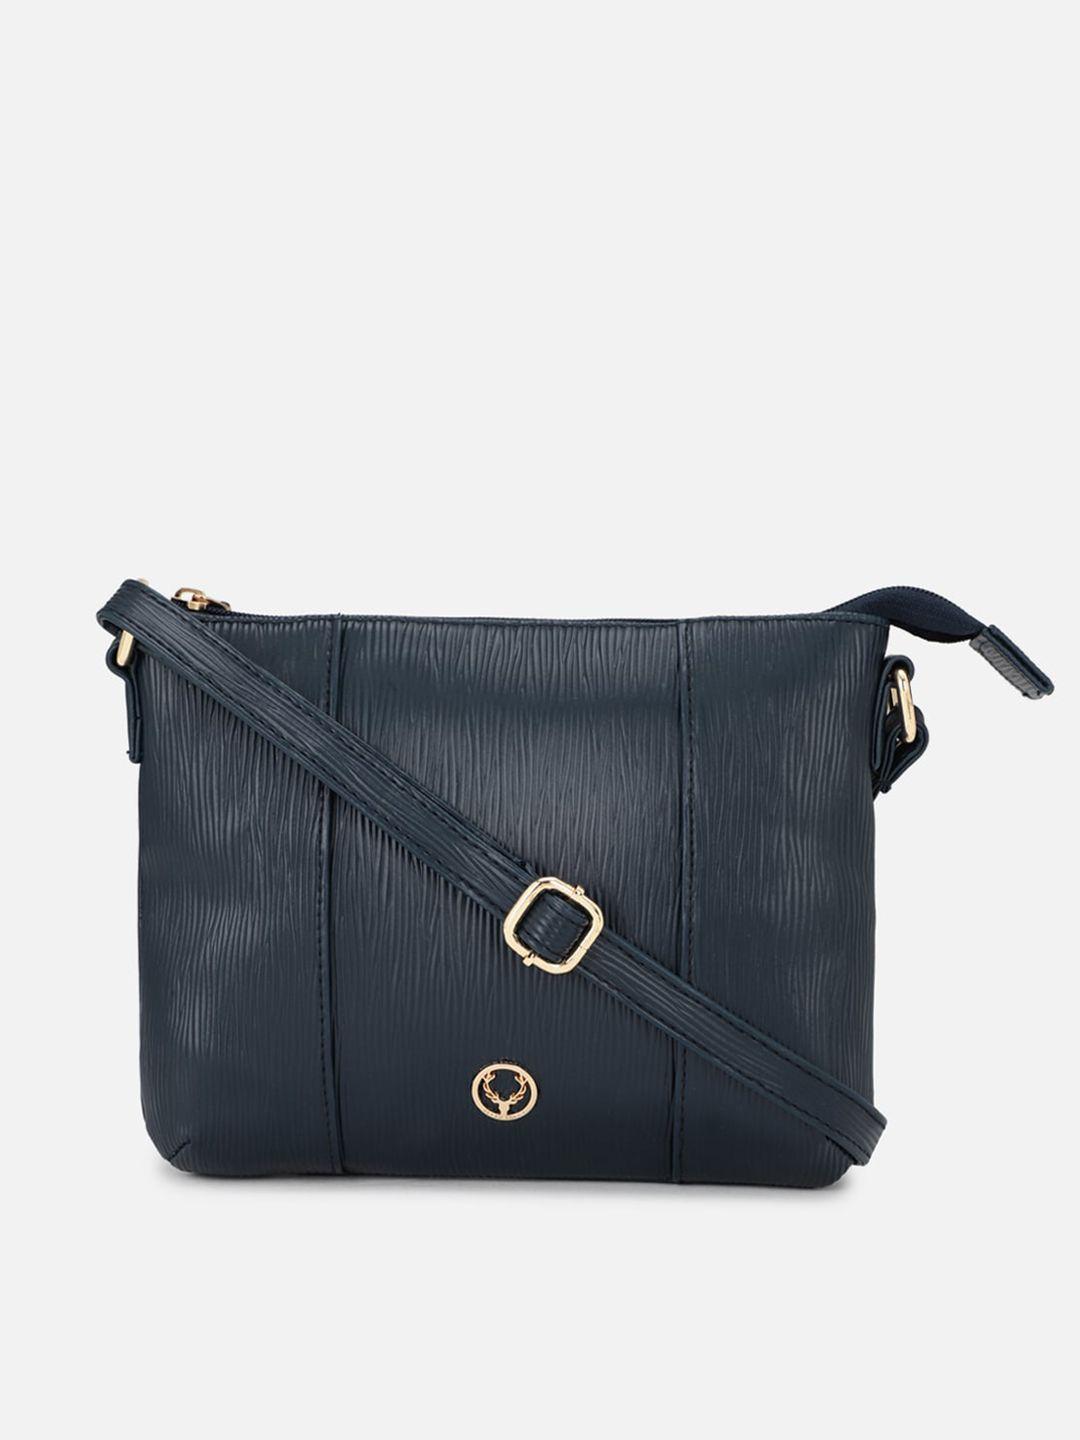 allen solly navy blue textured pu structured sling bag